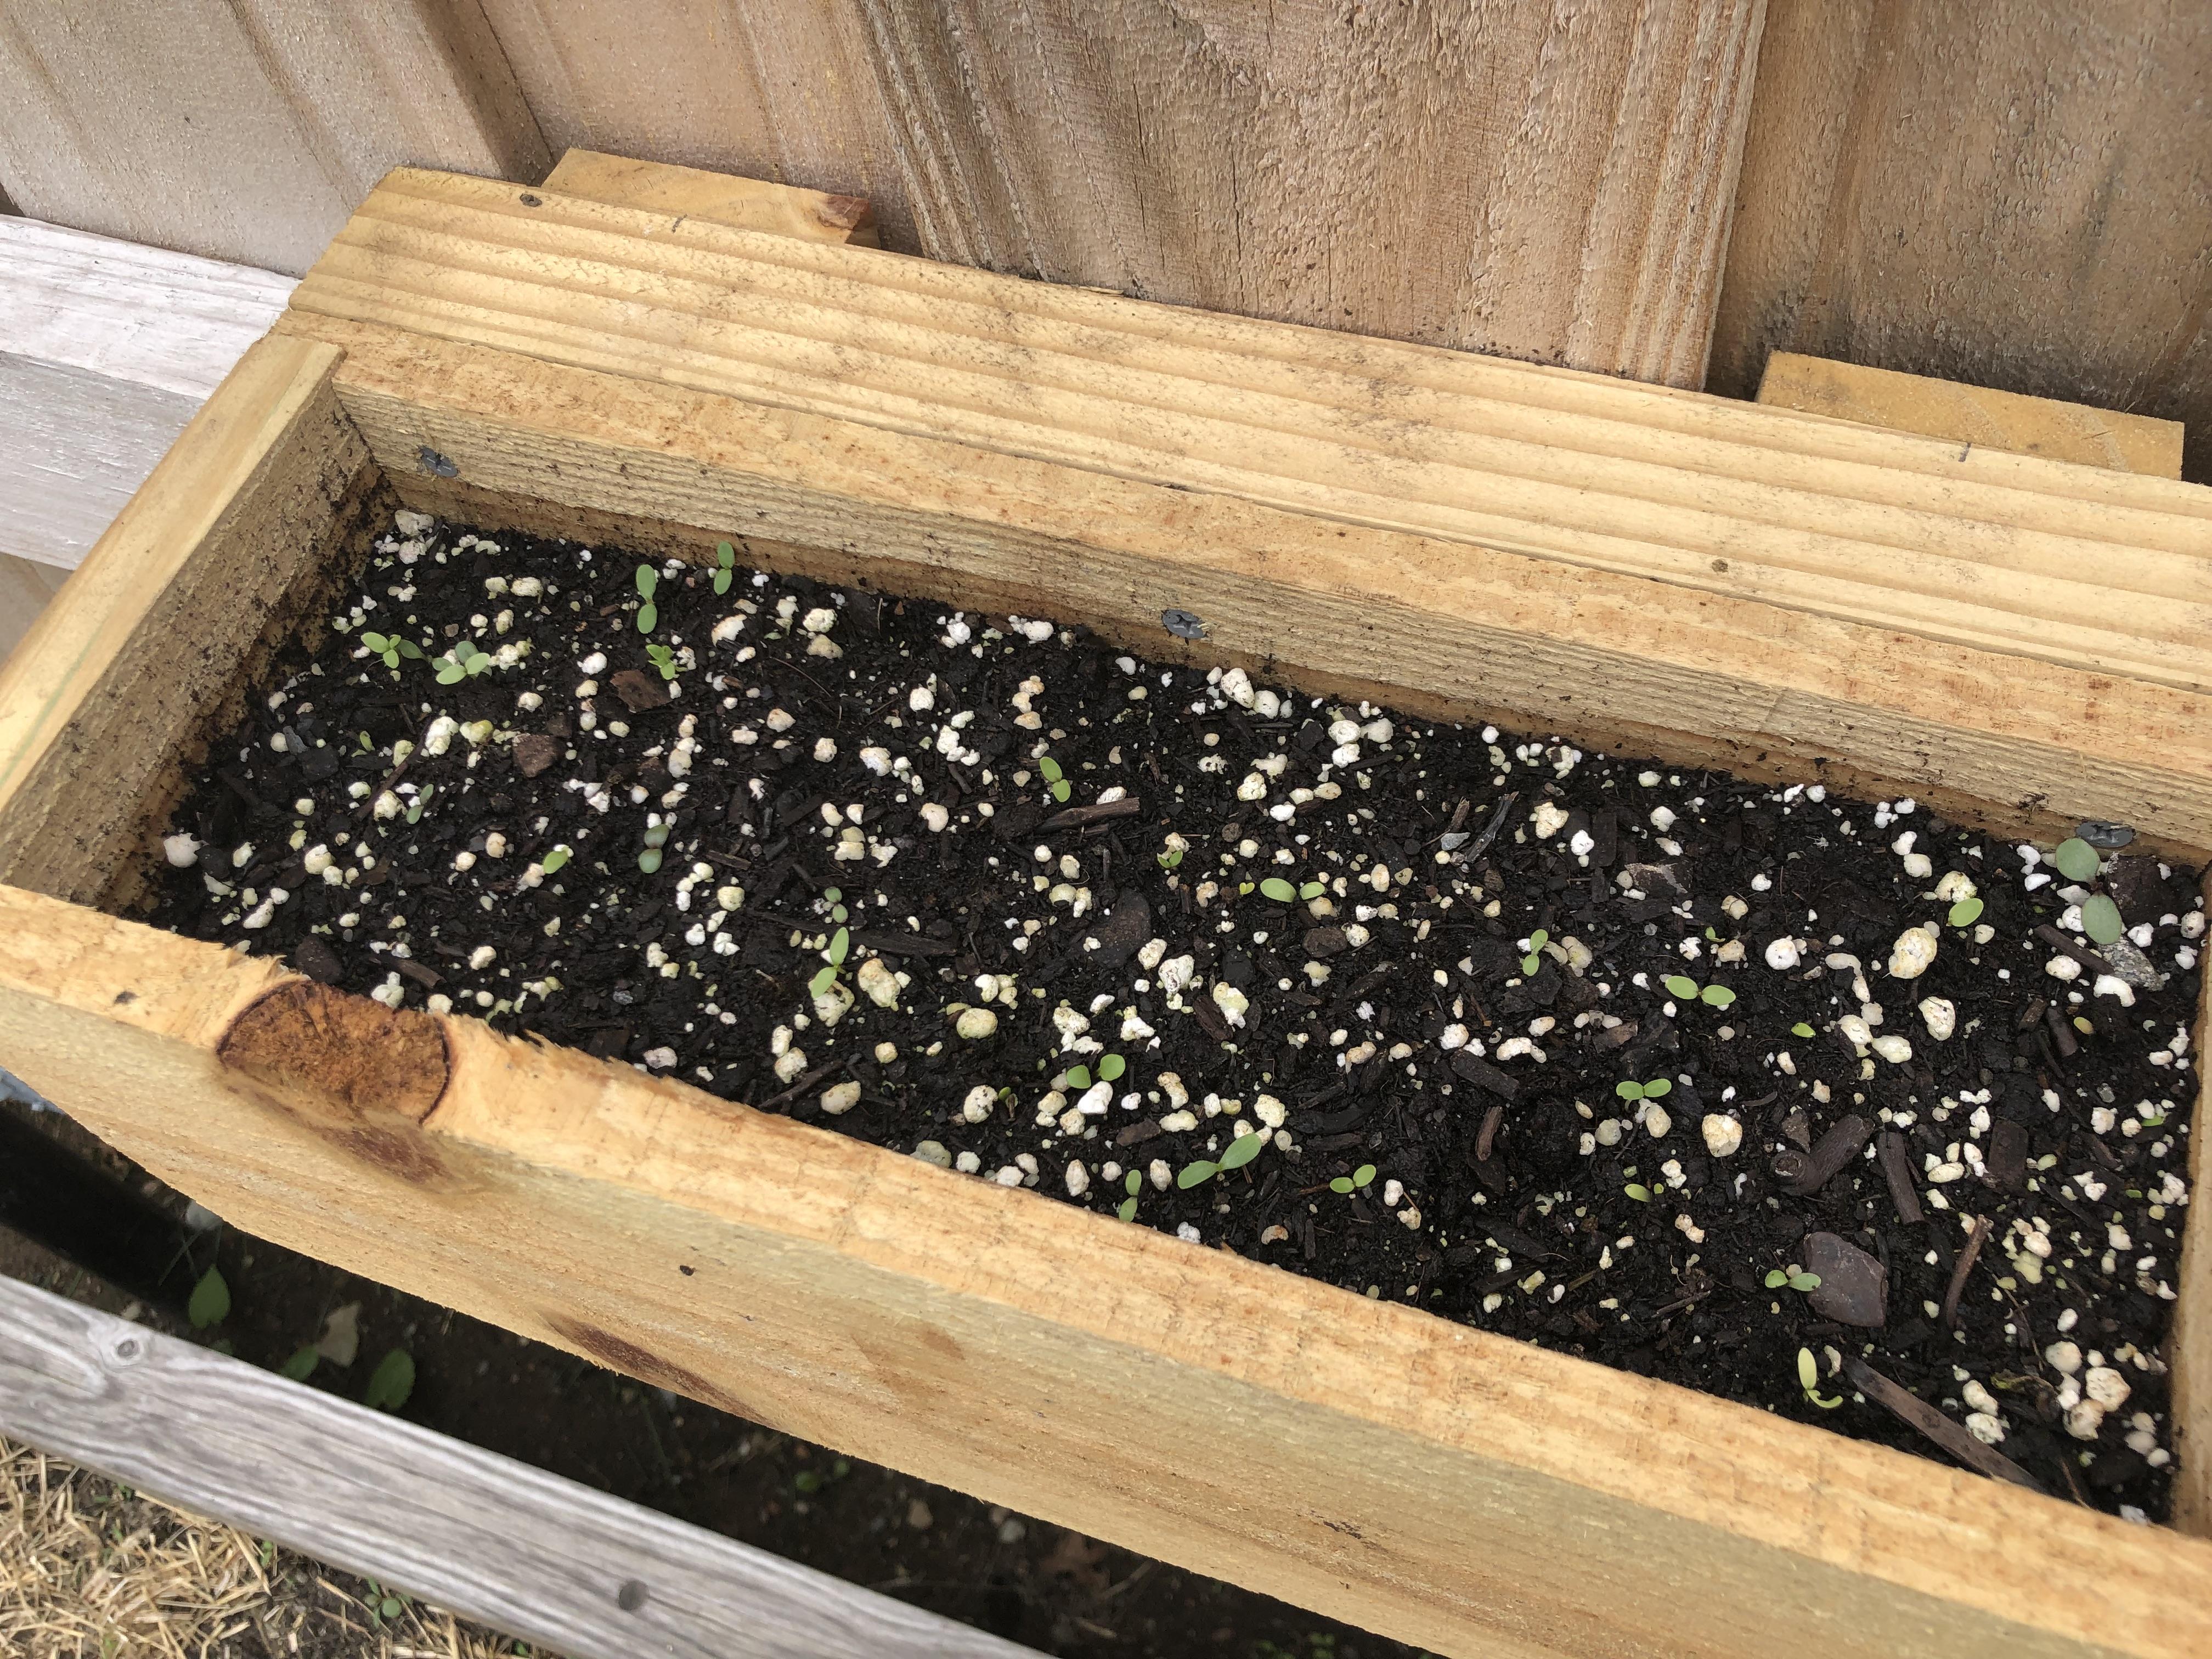 40 15 Weyham_Fence Flower Boxes_Sprouts.JPG